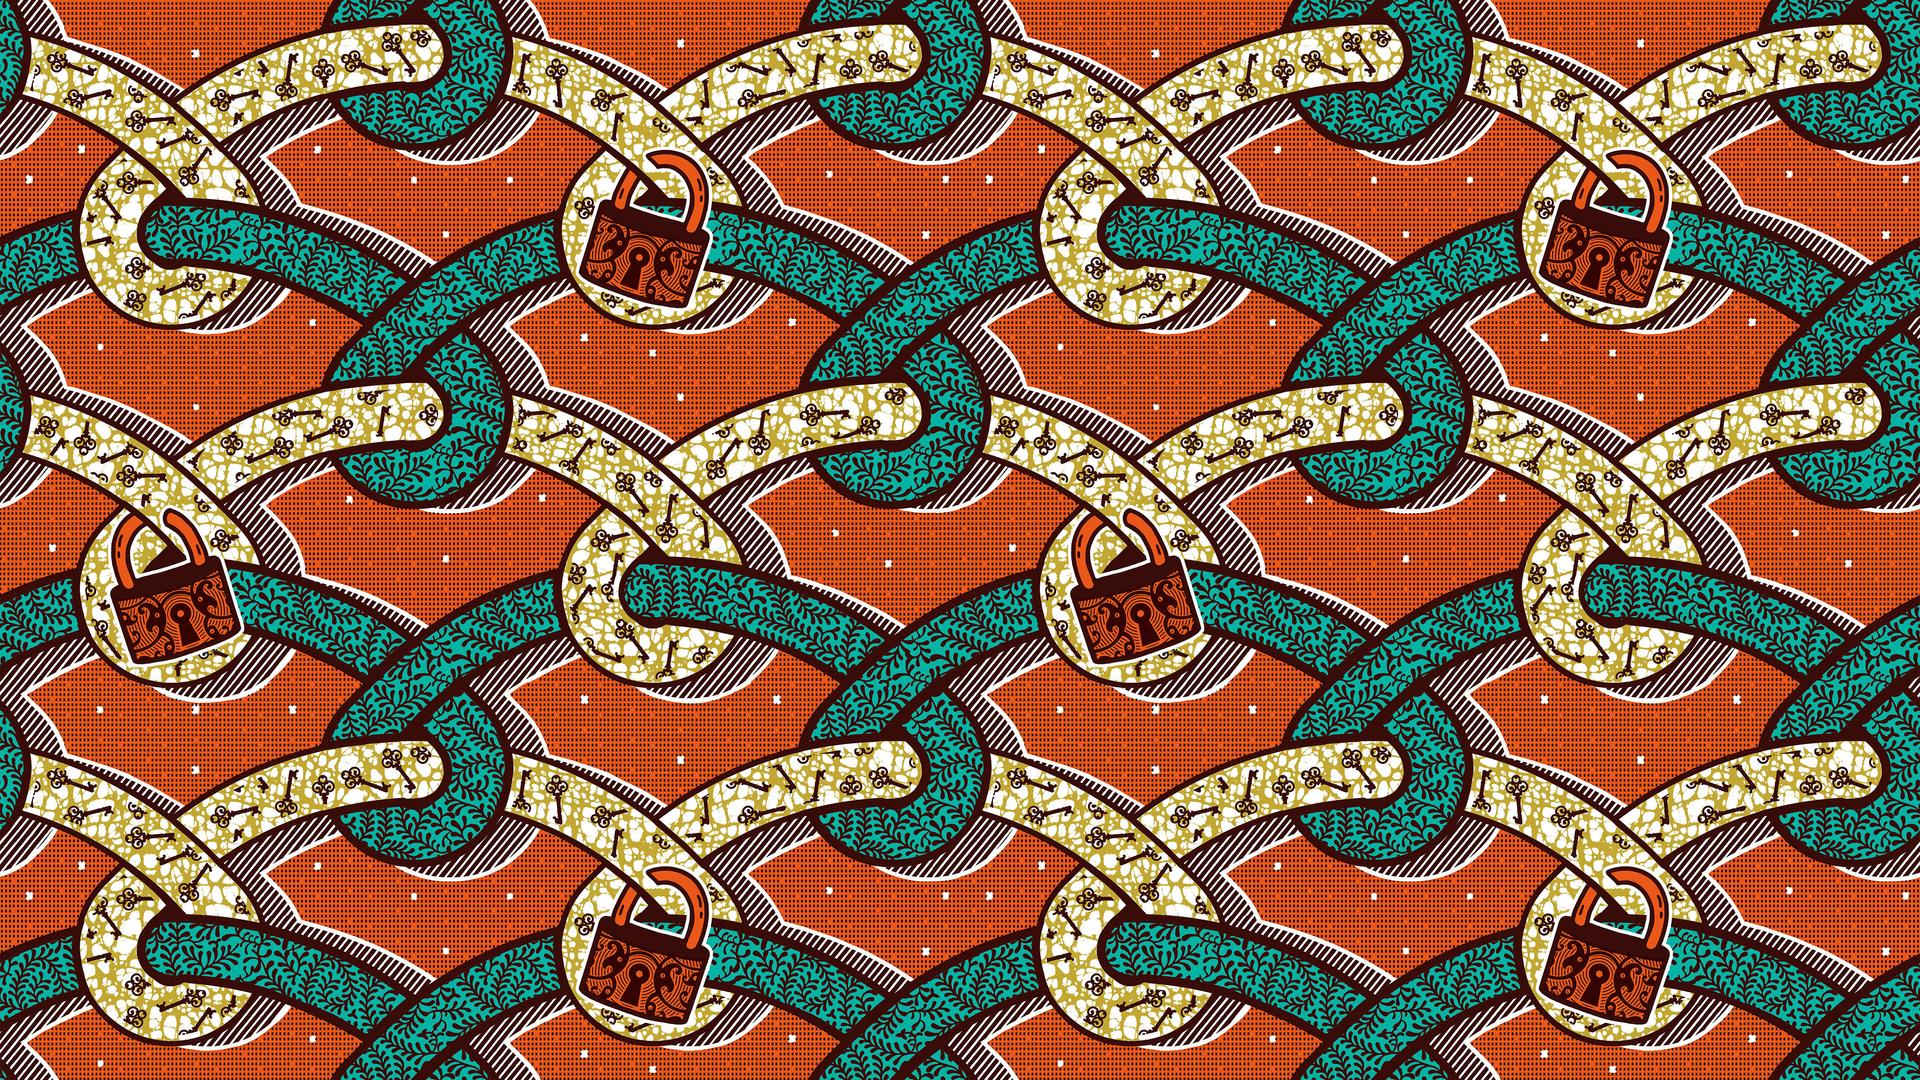 A padlock motif on fabric produced by Ghana Textiles Printing represents the lockdown in response to the coronavirus pandemic.